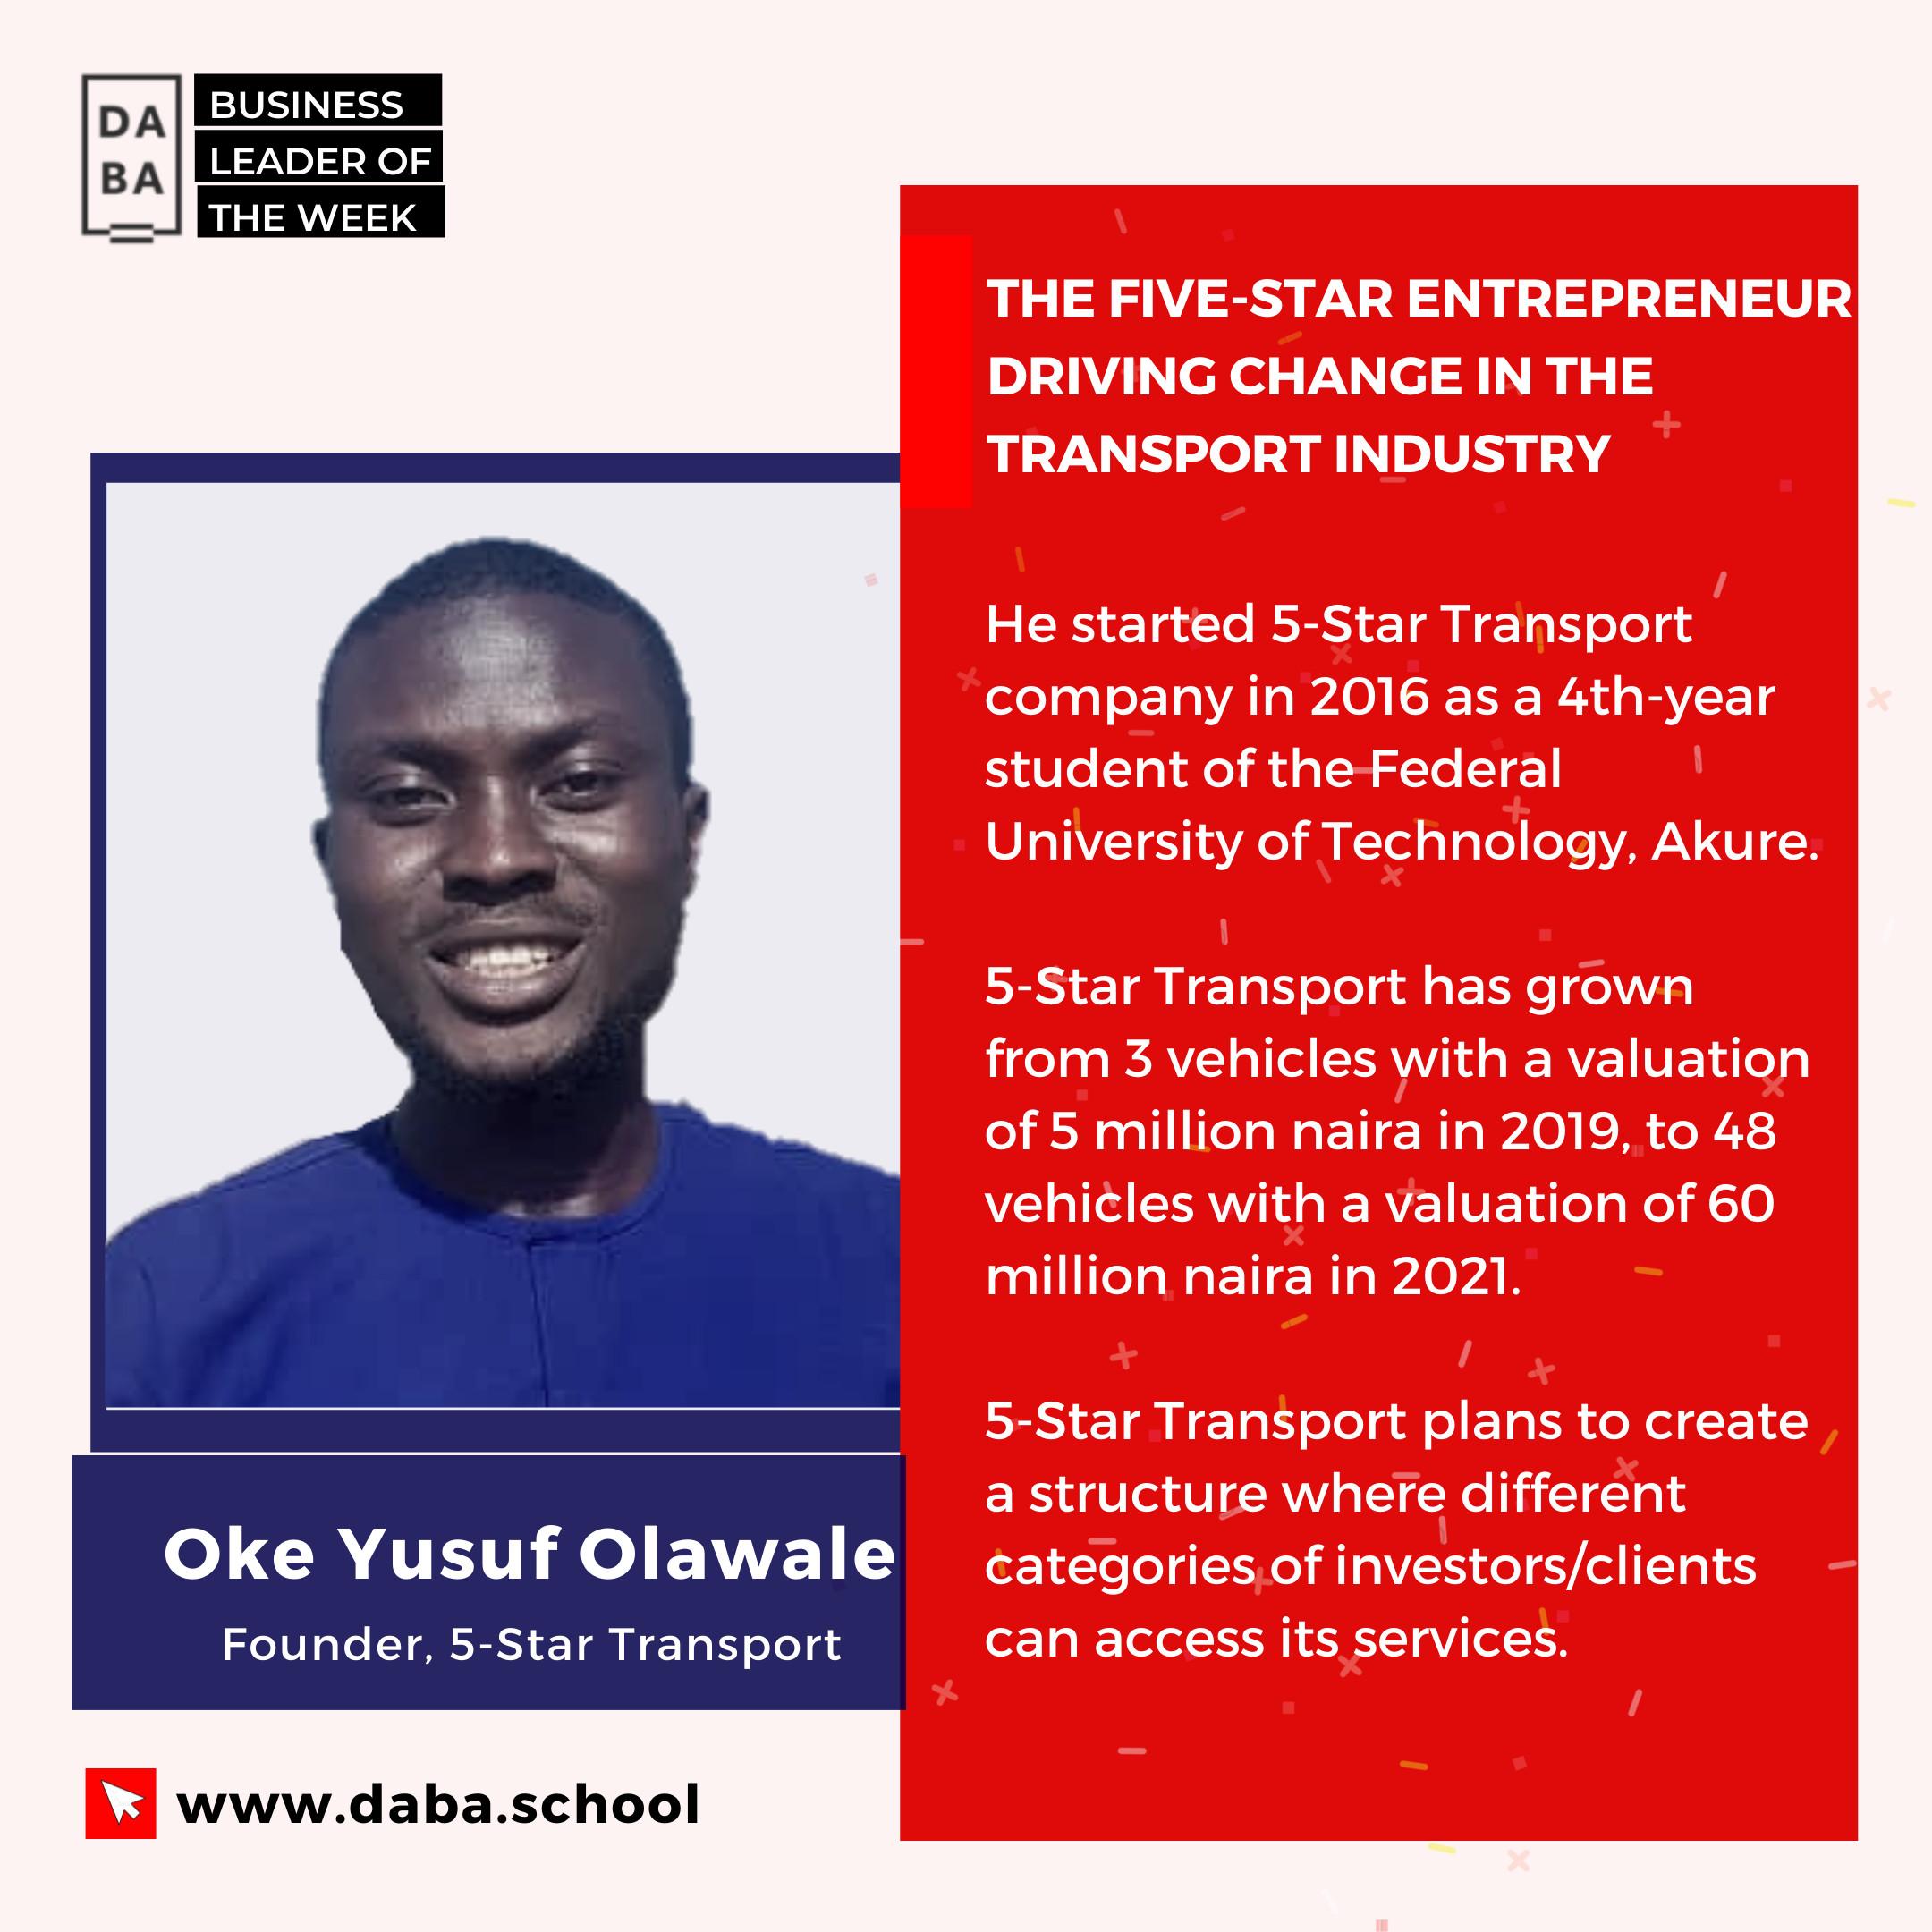 Cover Image for BLTW — Oke Yusuf Olawale: The Five-Star Entrepreneur Driving Change In The Transport Industry 